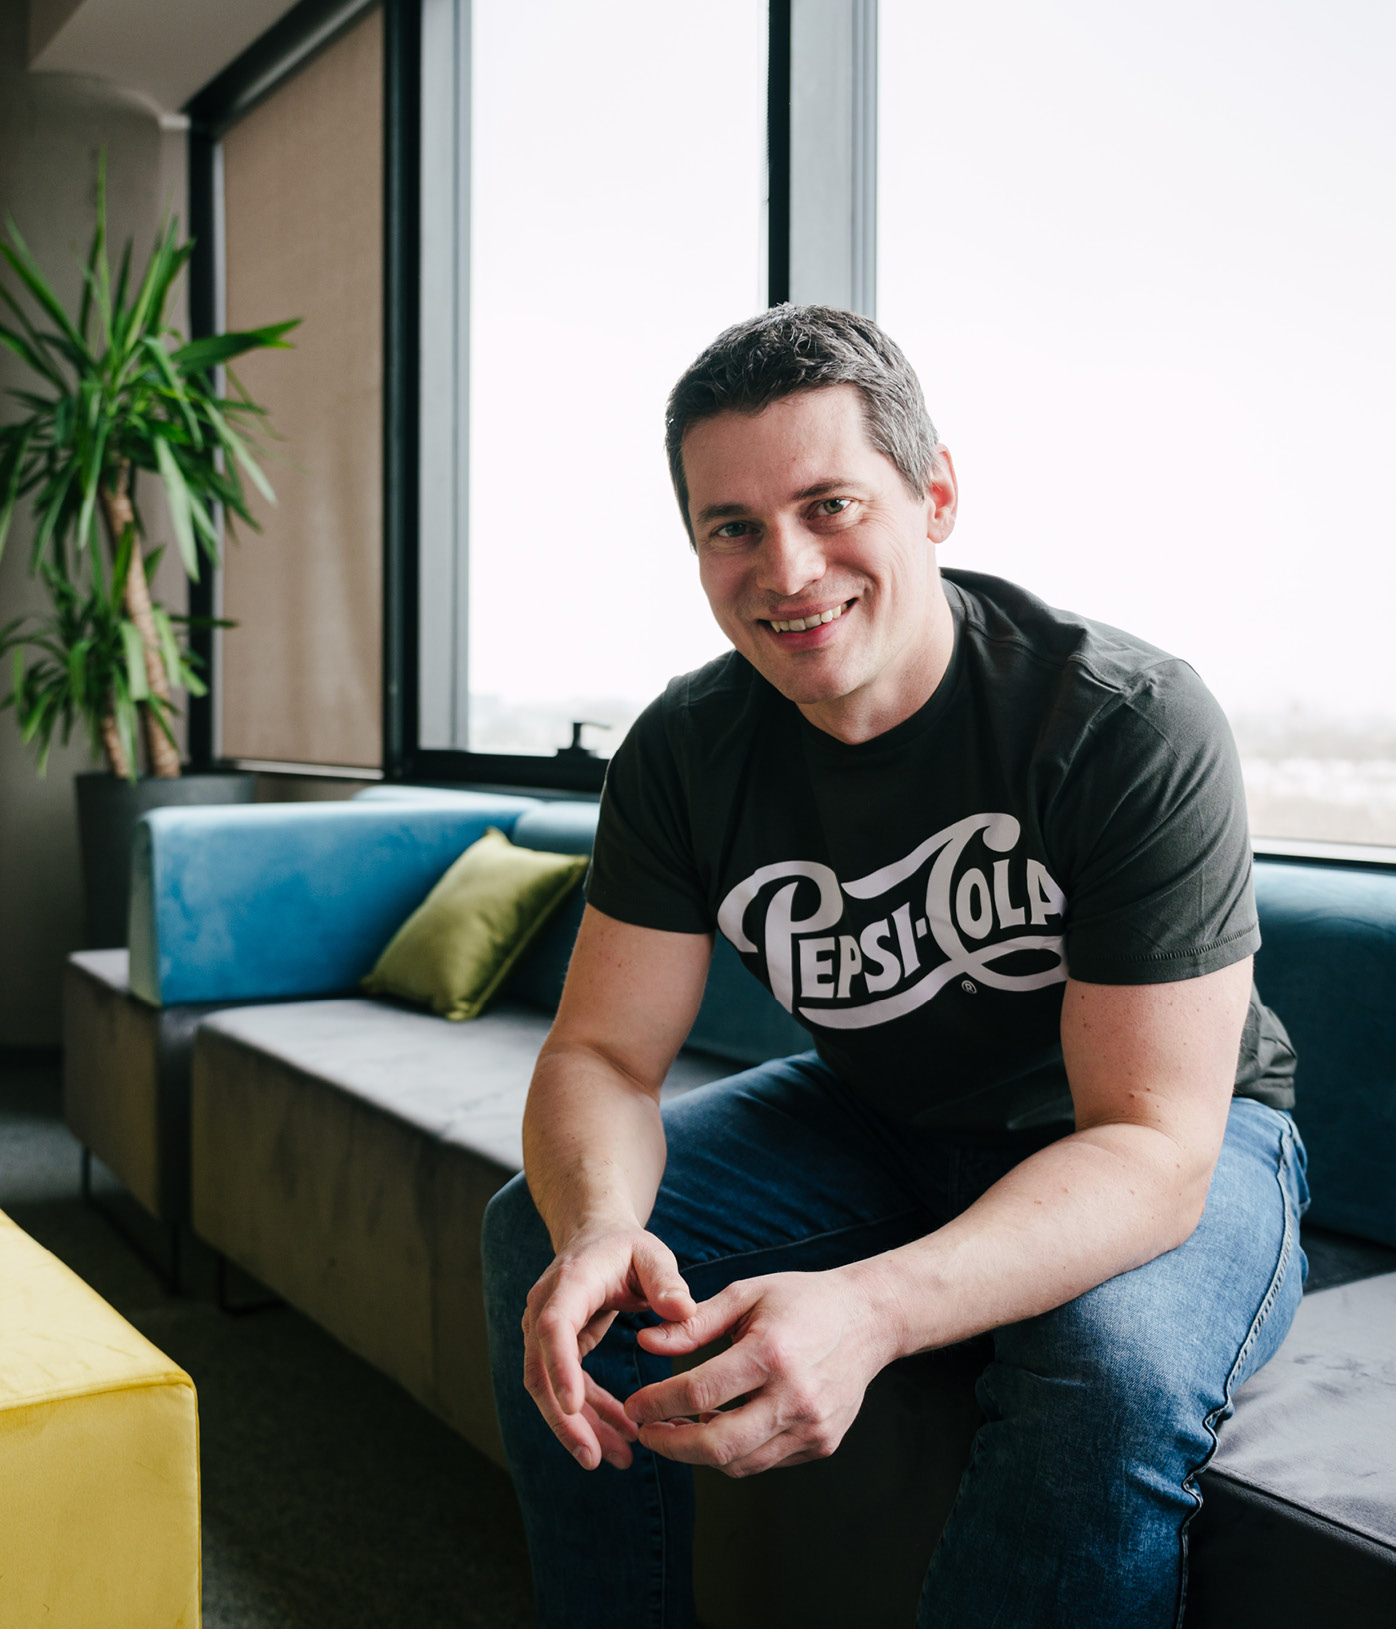 Filip Sielka, GBS team lead, sits on a couch inside his brightly lit workspace with colorful blue, green and yellow furnishings. He has short brown hair and is wearing jeans with a PepsiCo t-shirt. He smiles as he casually leans forward resting his elbows on his knees.